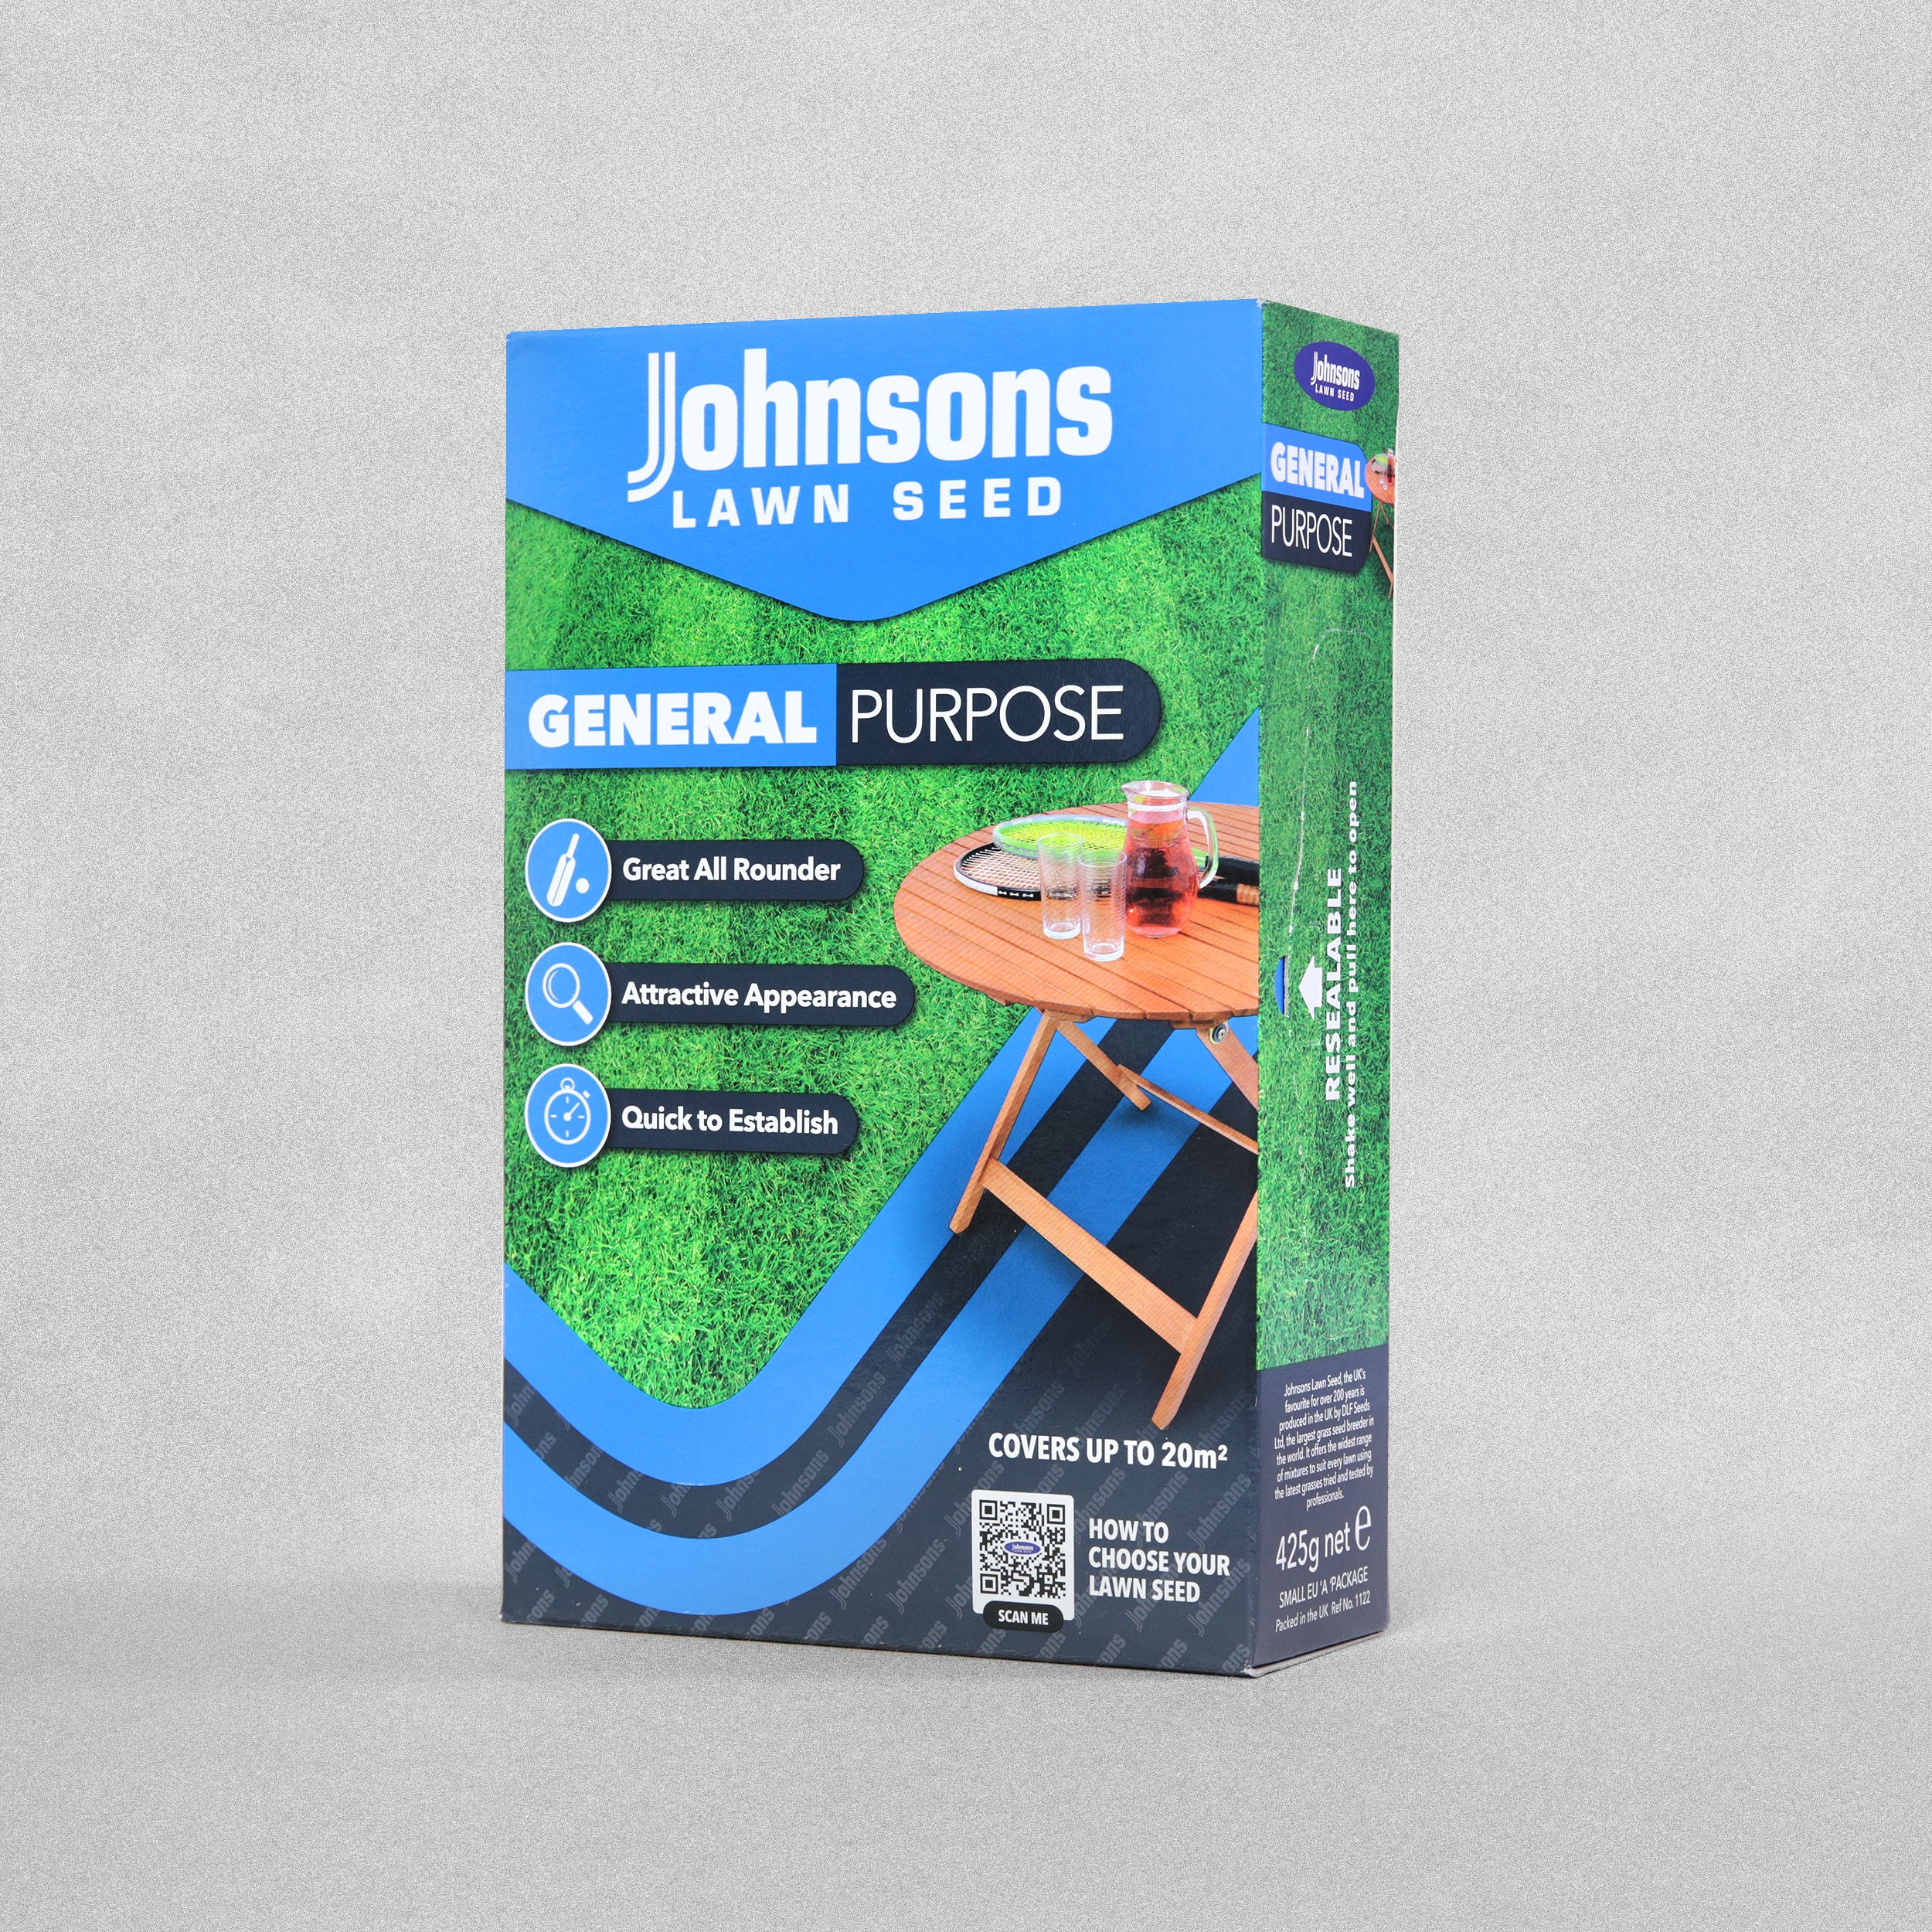 Johnsons Lawn Seed General Purpose 425g - 20m2 Coverage